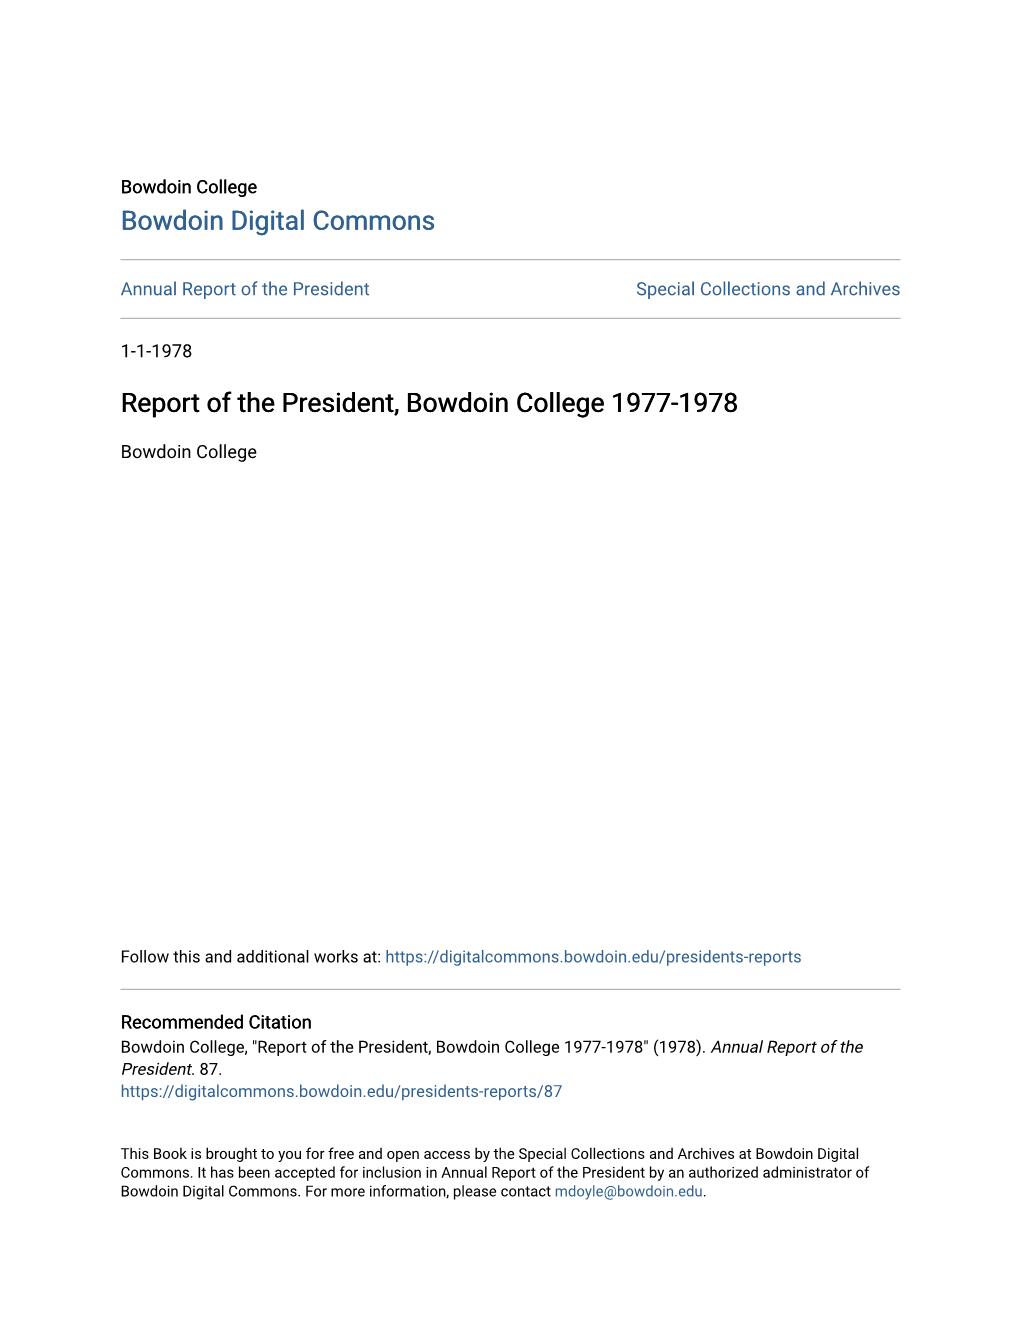 Report of the President, Bowdoin College 1977-1978